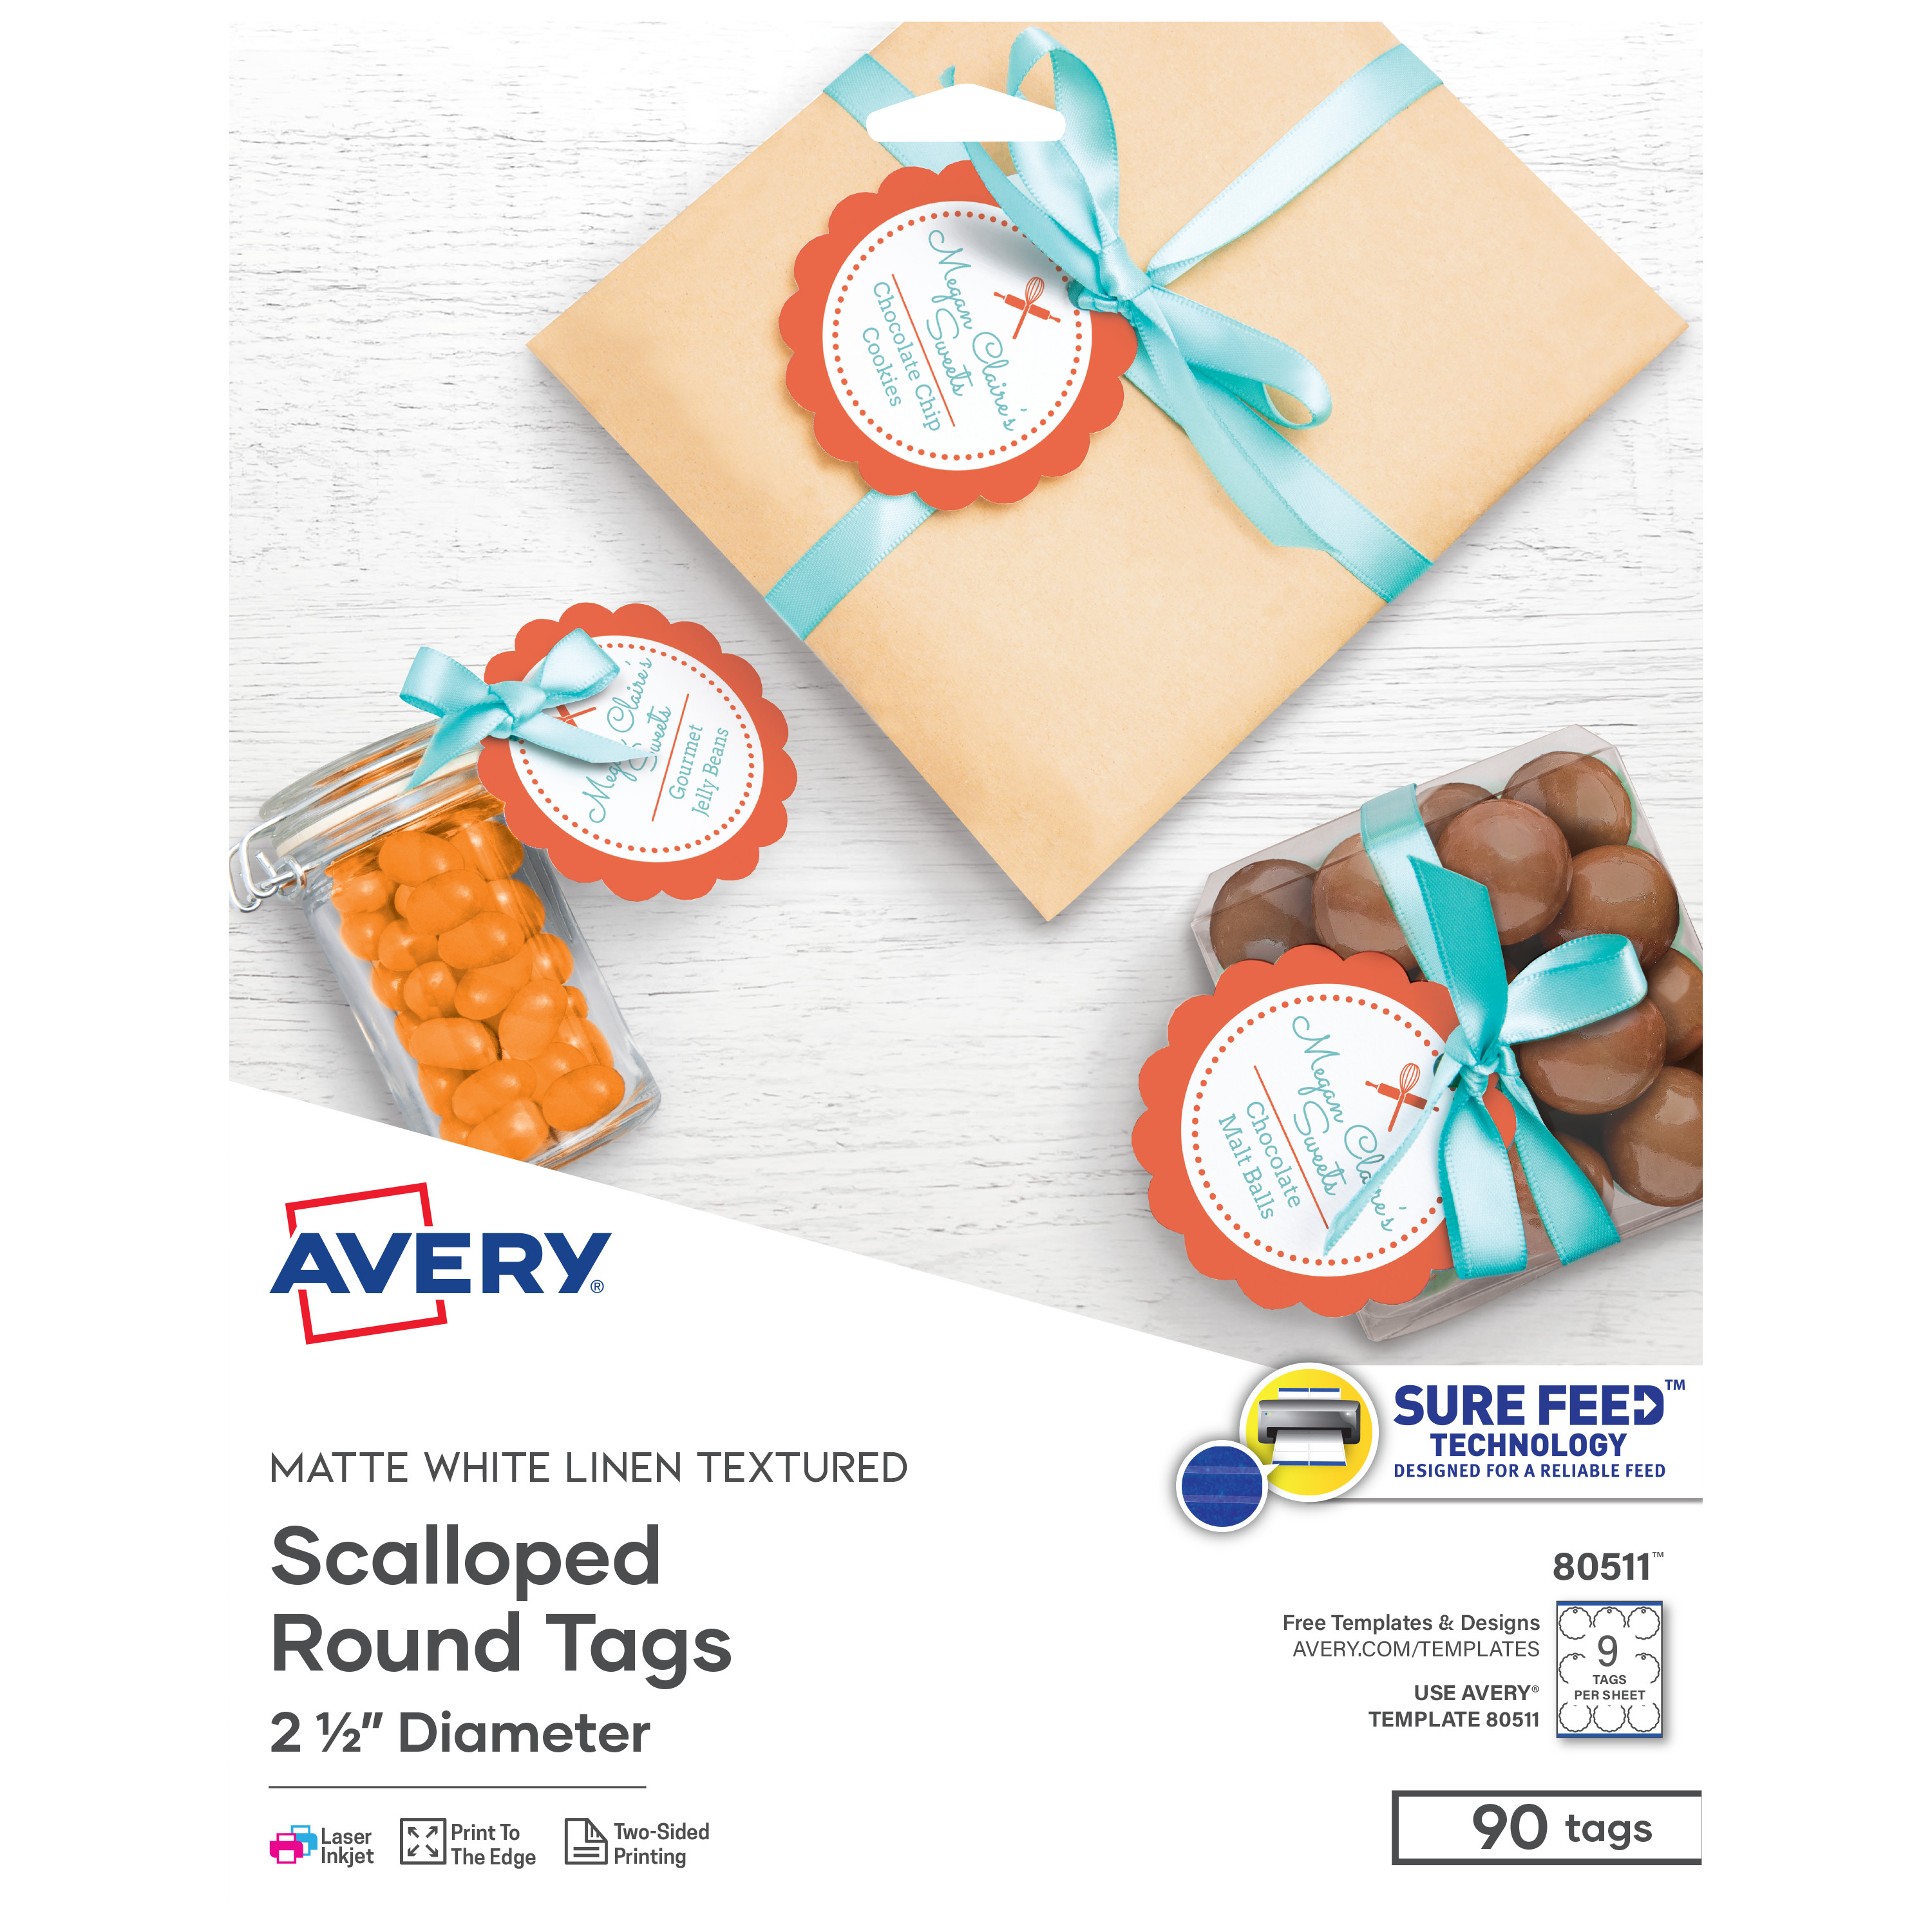 Avery Printable Blank Scallop Round Tags, 2.5" Diameter (80511) - image 1 of 7